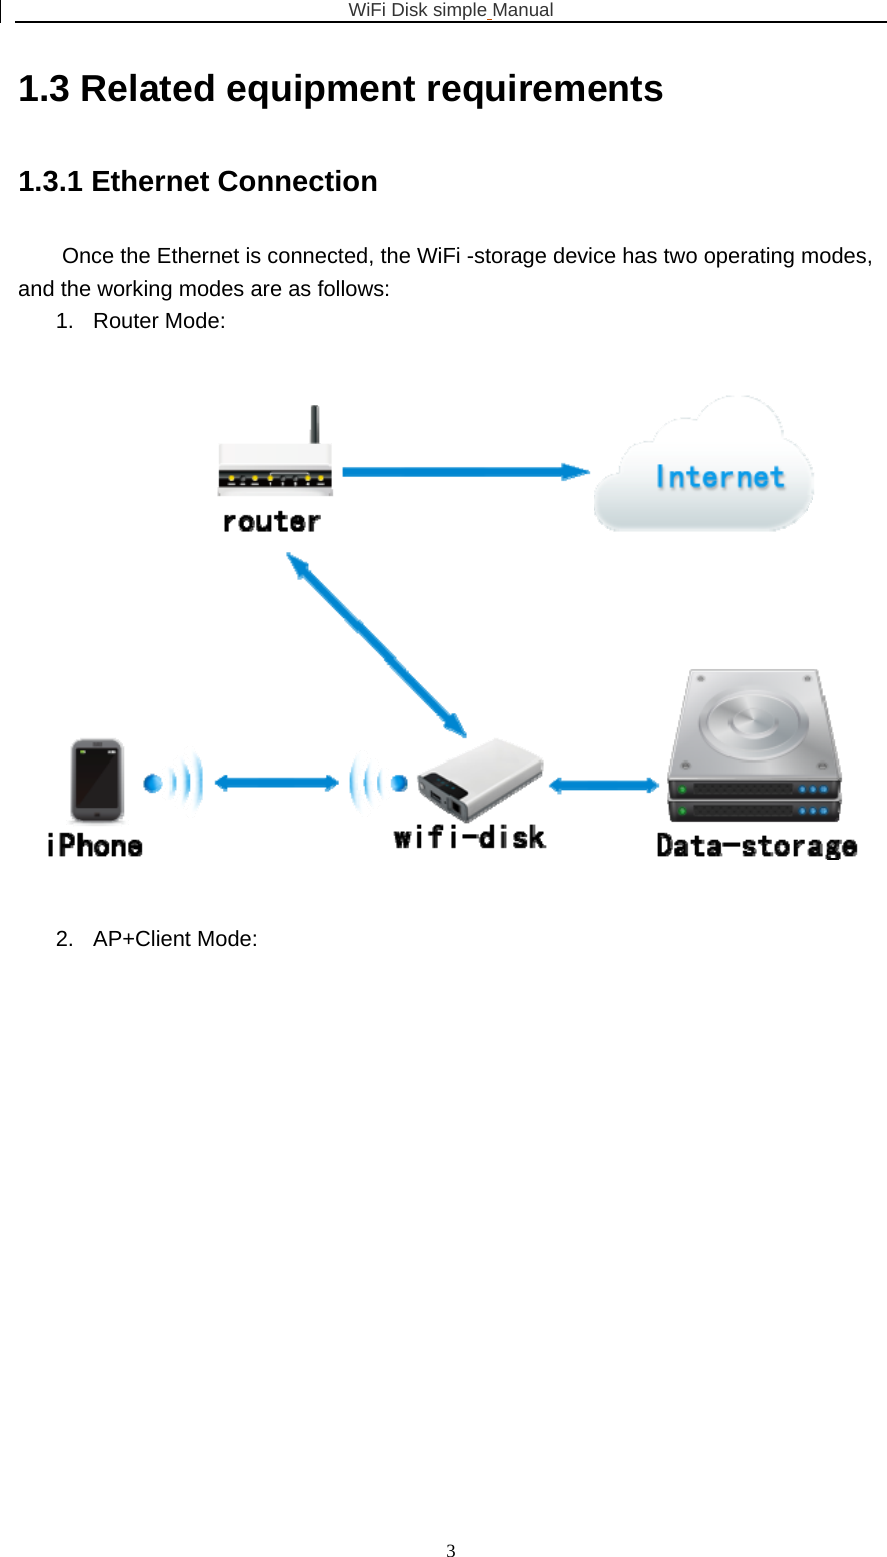 WiFi Disk simple Manual  31.3 Related equipment requirements   1.3.1 Ethernet Connection Once the Ethernet is connected, the WiFi -storage device has two operating modes, and the working modes are as follows: 1. Router Mode:  2. AP+Client Mode: 